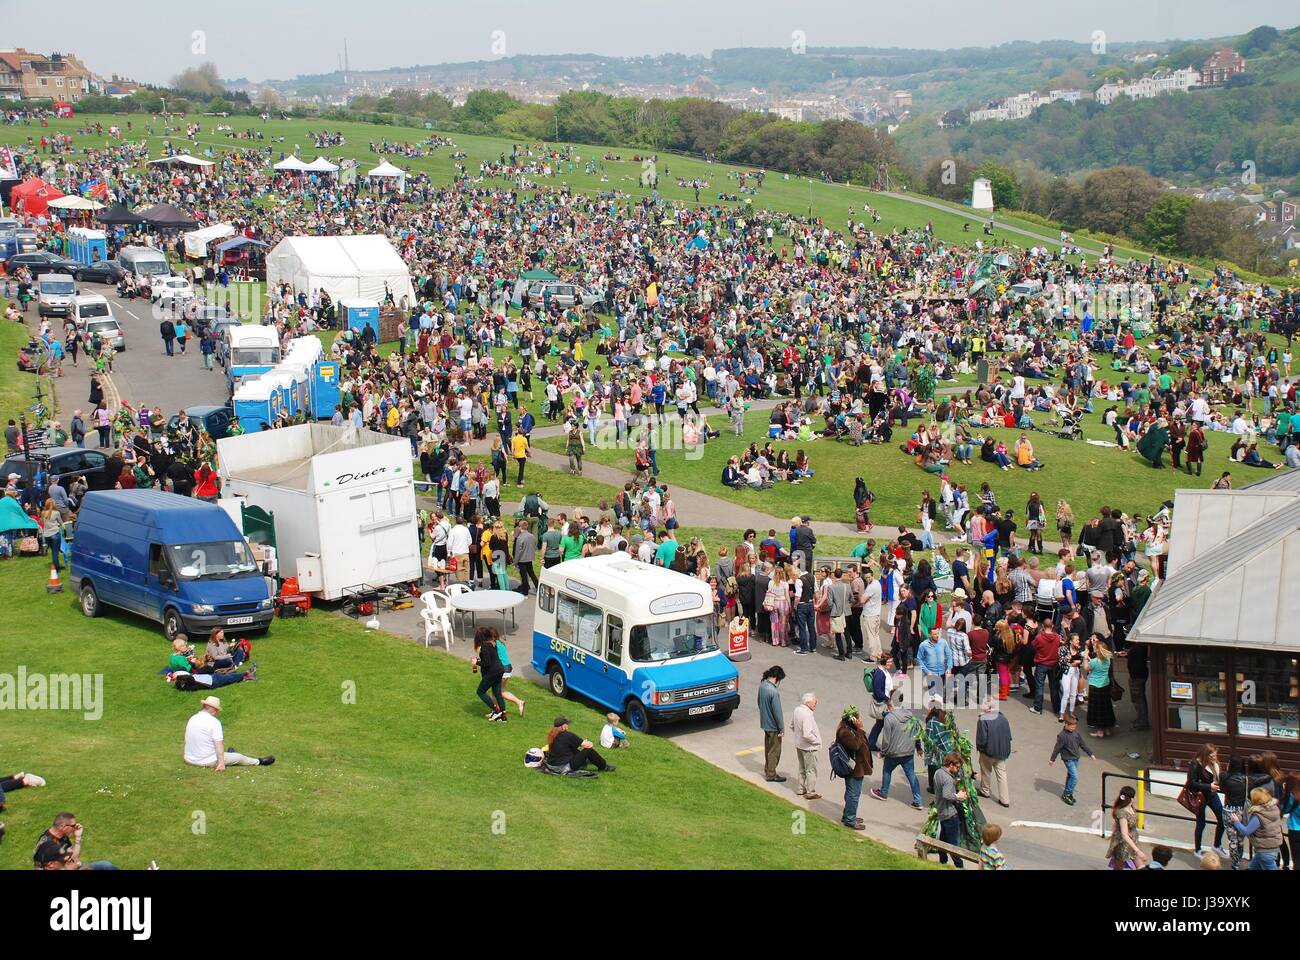 People on the West Hill during the annual Jack In The Green festival at Hastings in East Sussex, England on May 5, 2014. Stock Photo